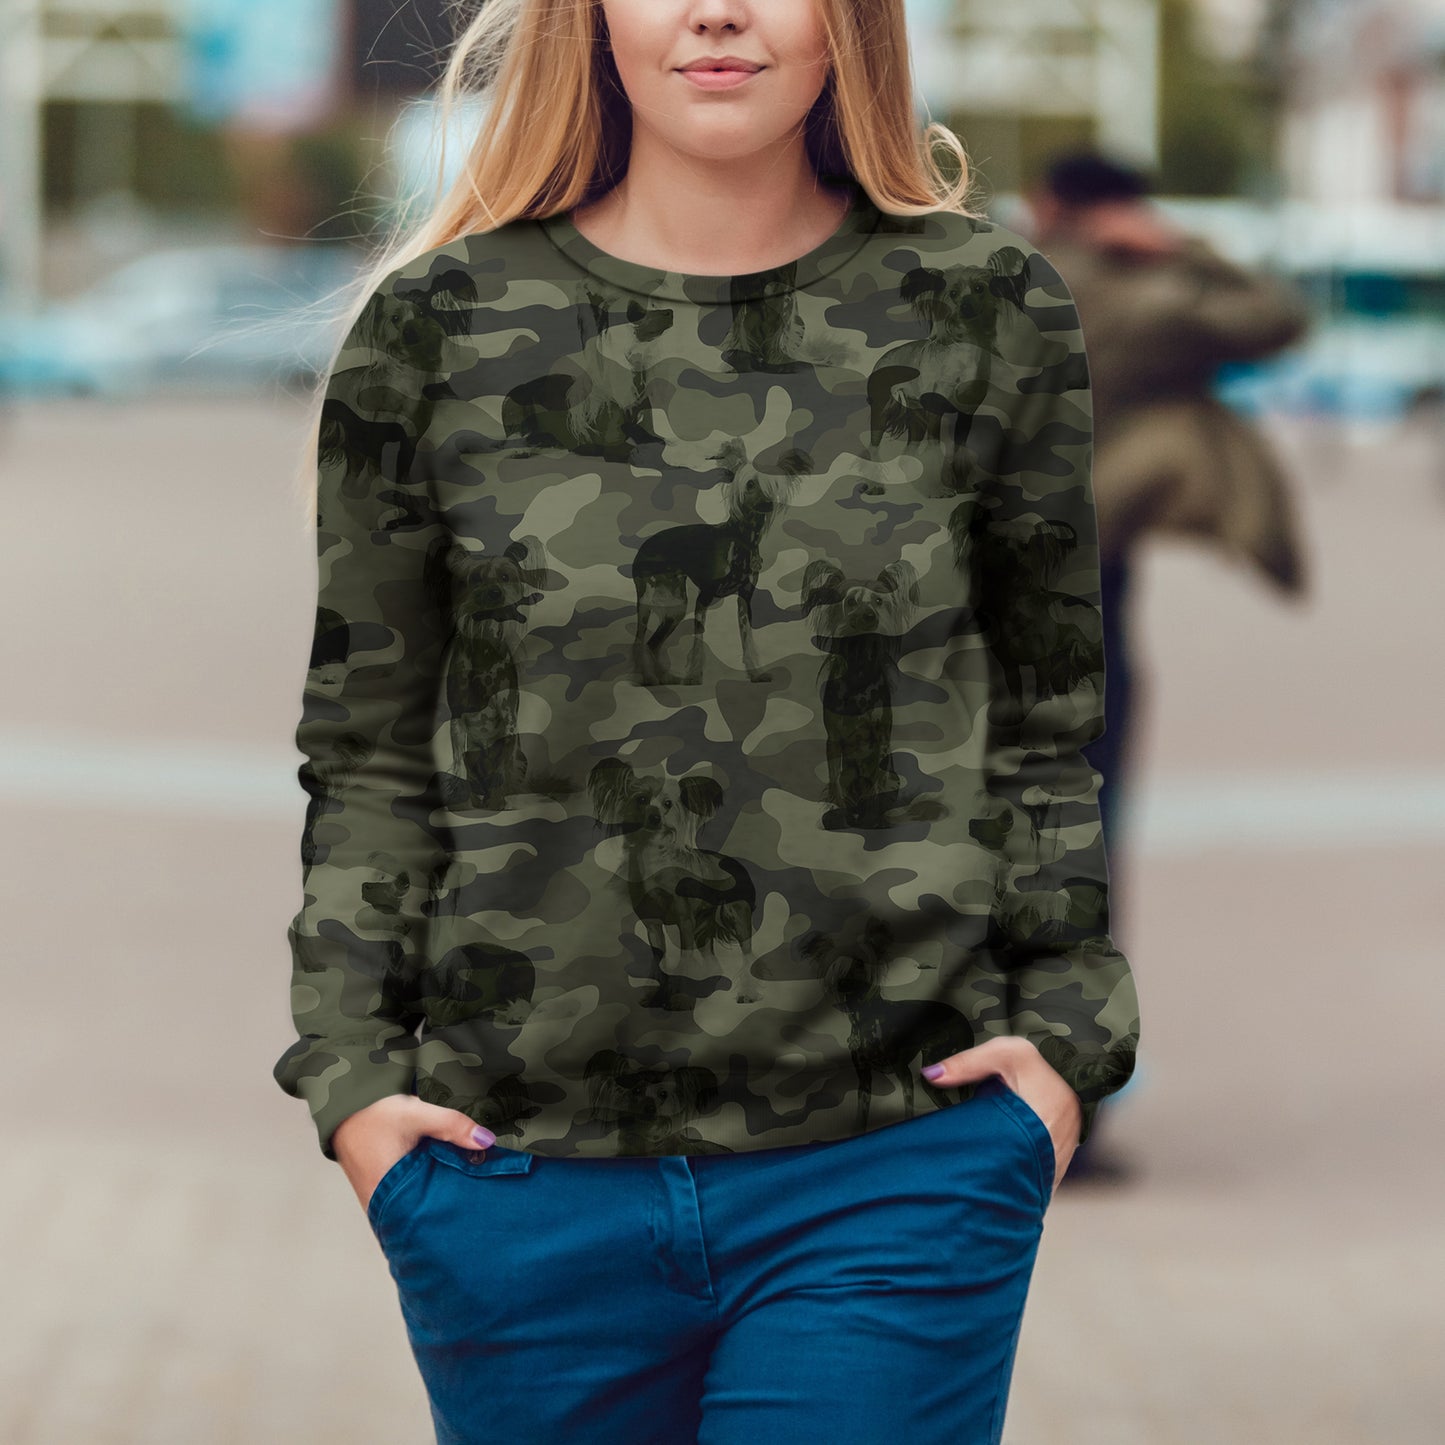 Street Style With Chinese Crested Camo Sweatshirt V1